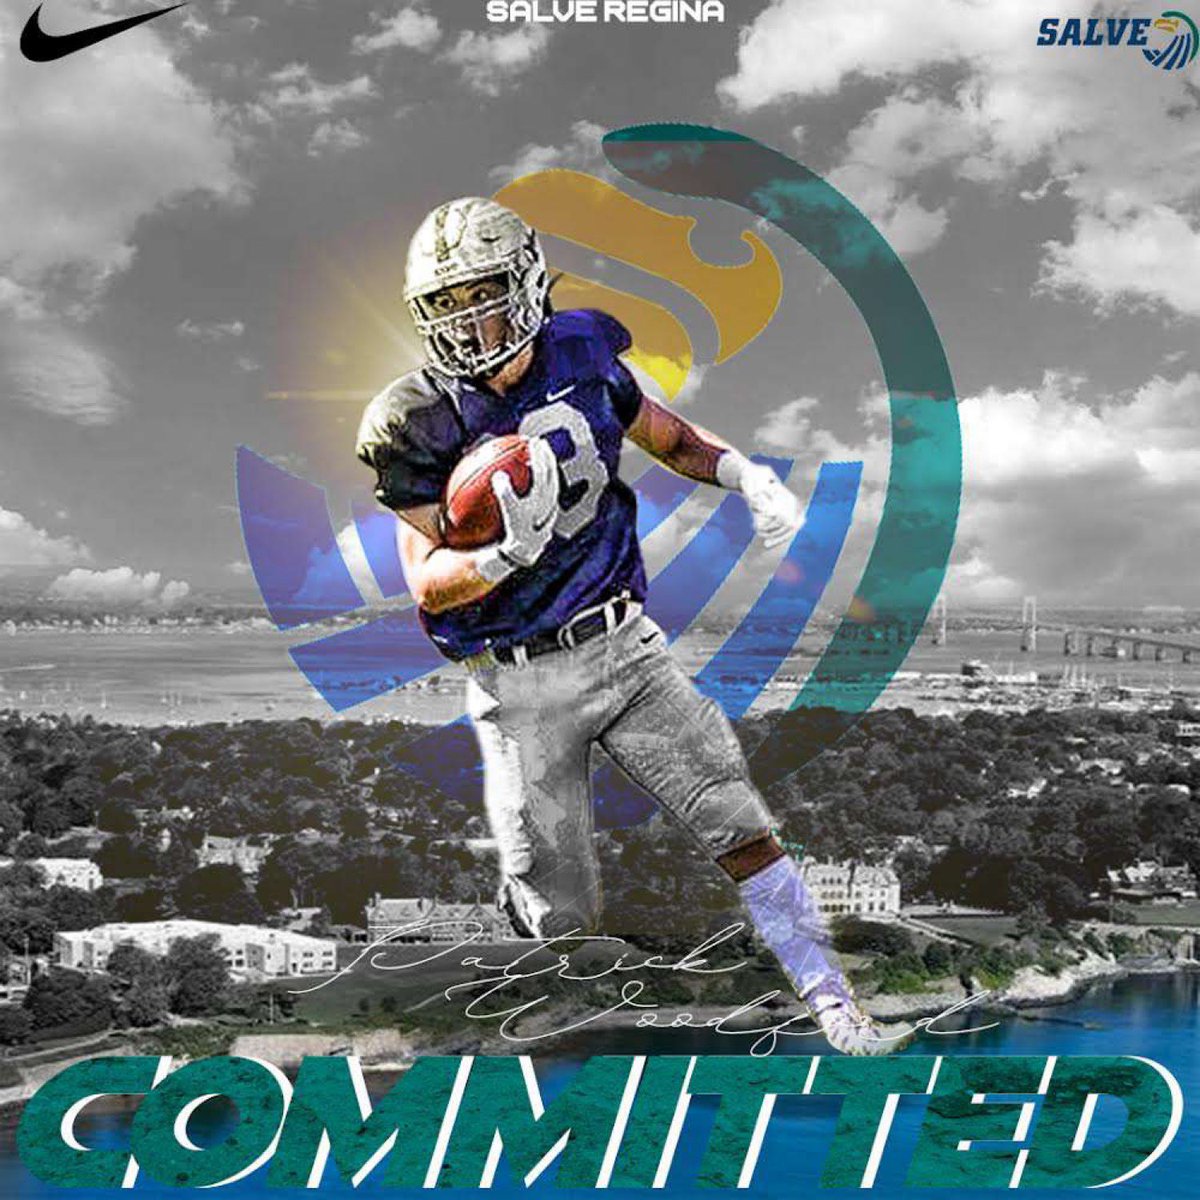 Home for the next four, proud to announce I will be continuing my academic and athletic career at salve Regina university! Thank you to my coaches, family and friends along the way. #rollseahawks